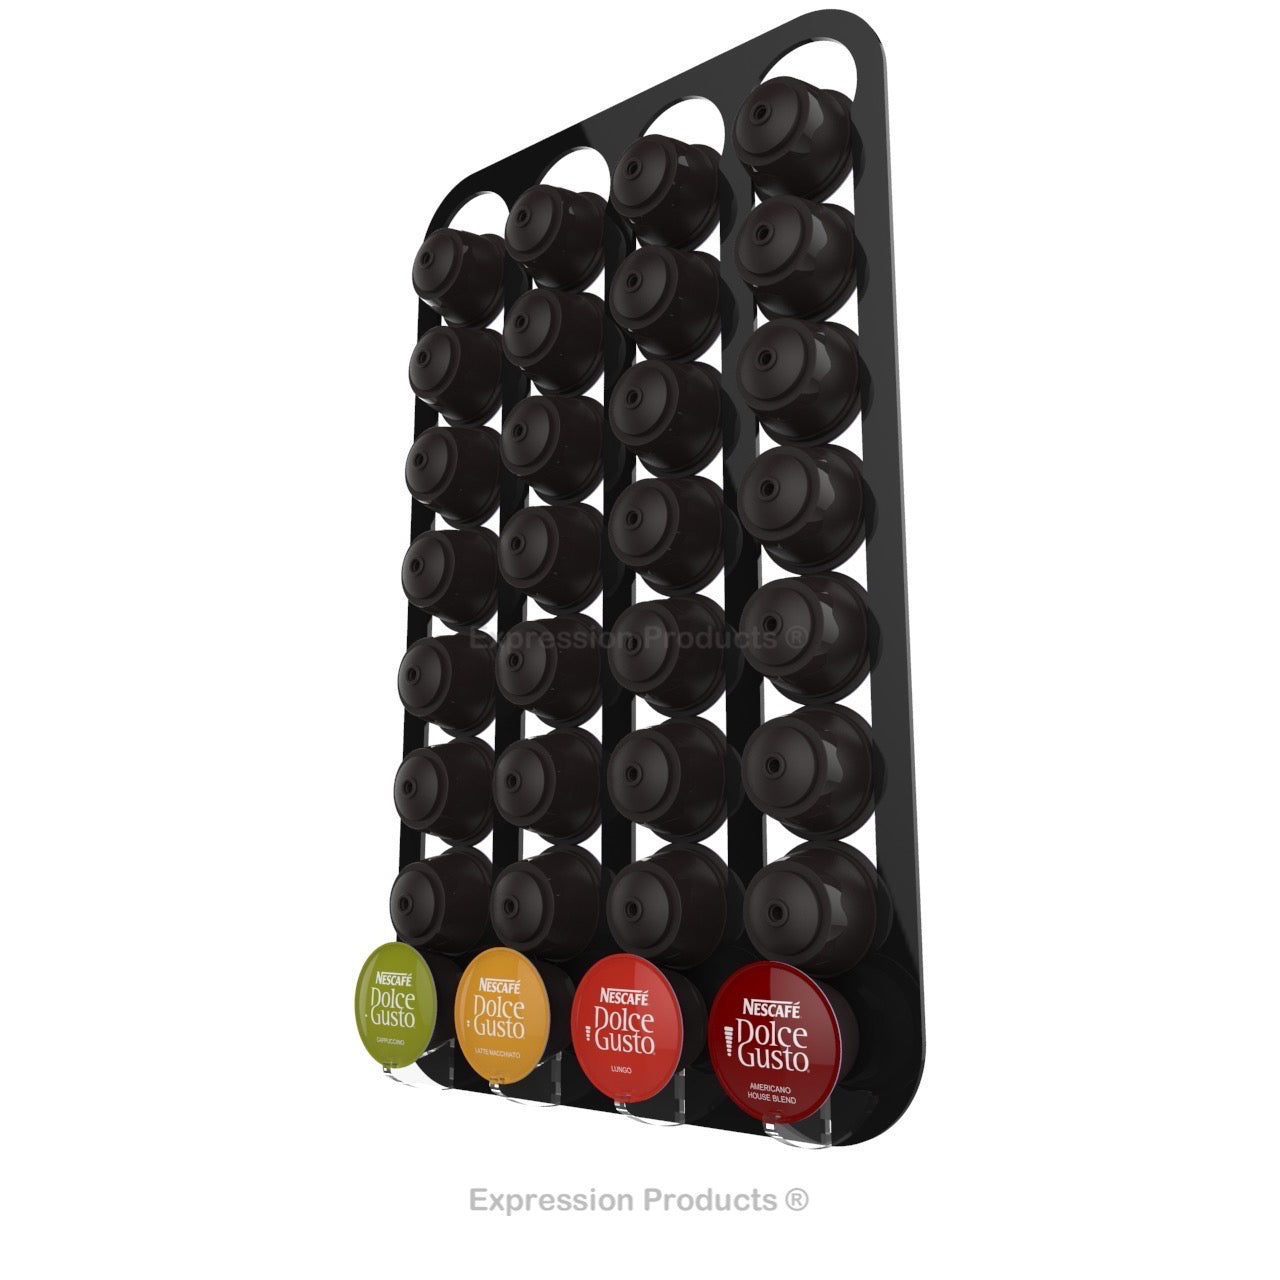 Dolce Gusto Coffee Pod Holder, Wall Mounted.  Shown in Black Holding 32 Pods